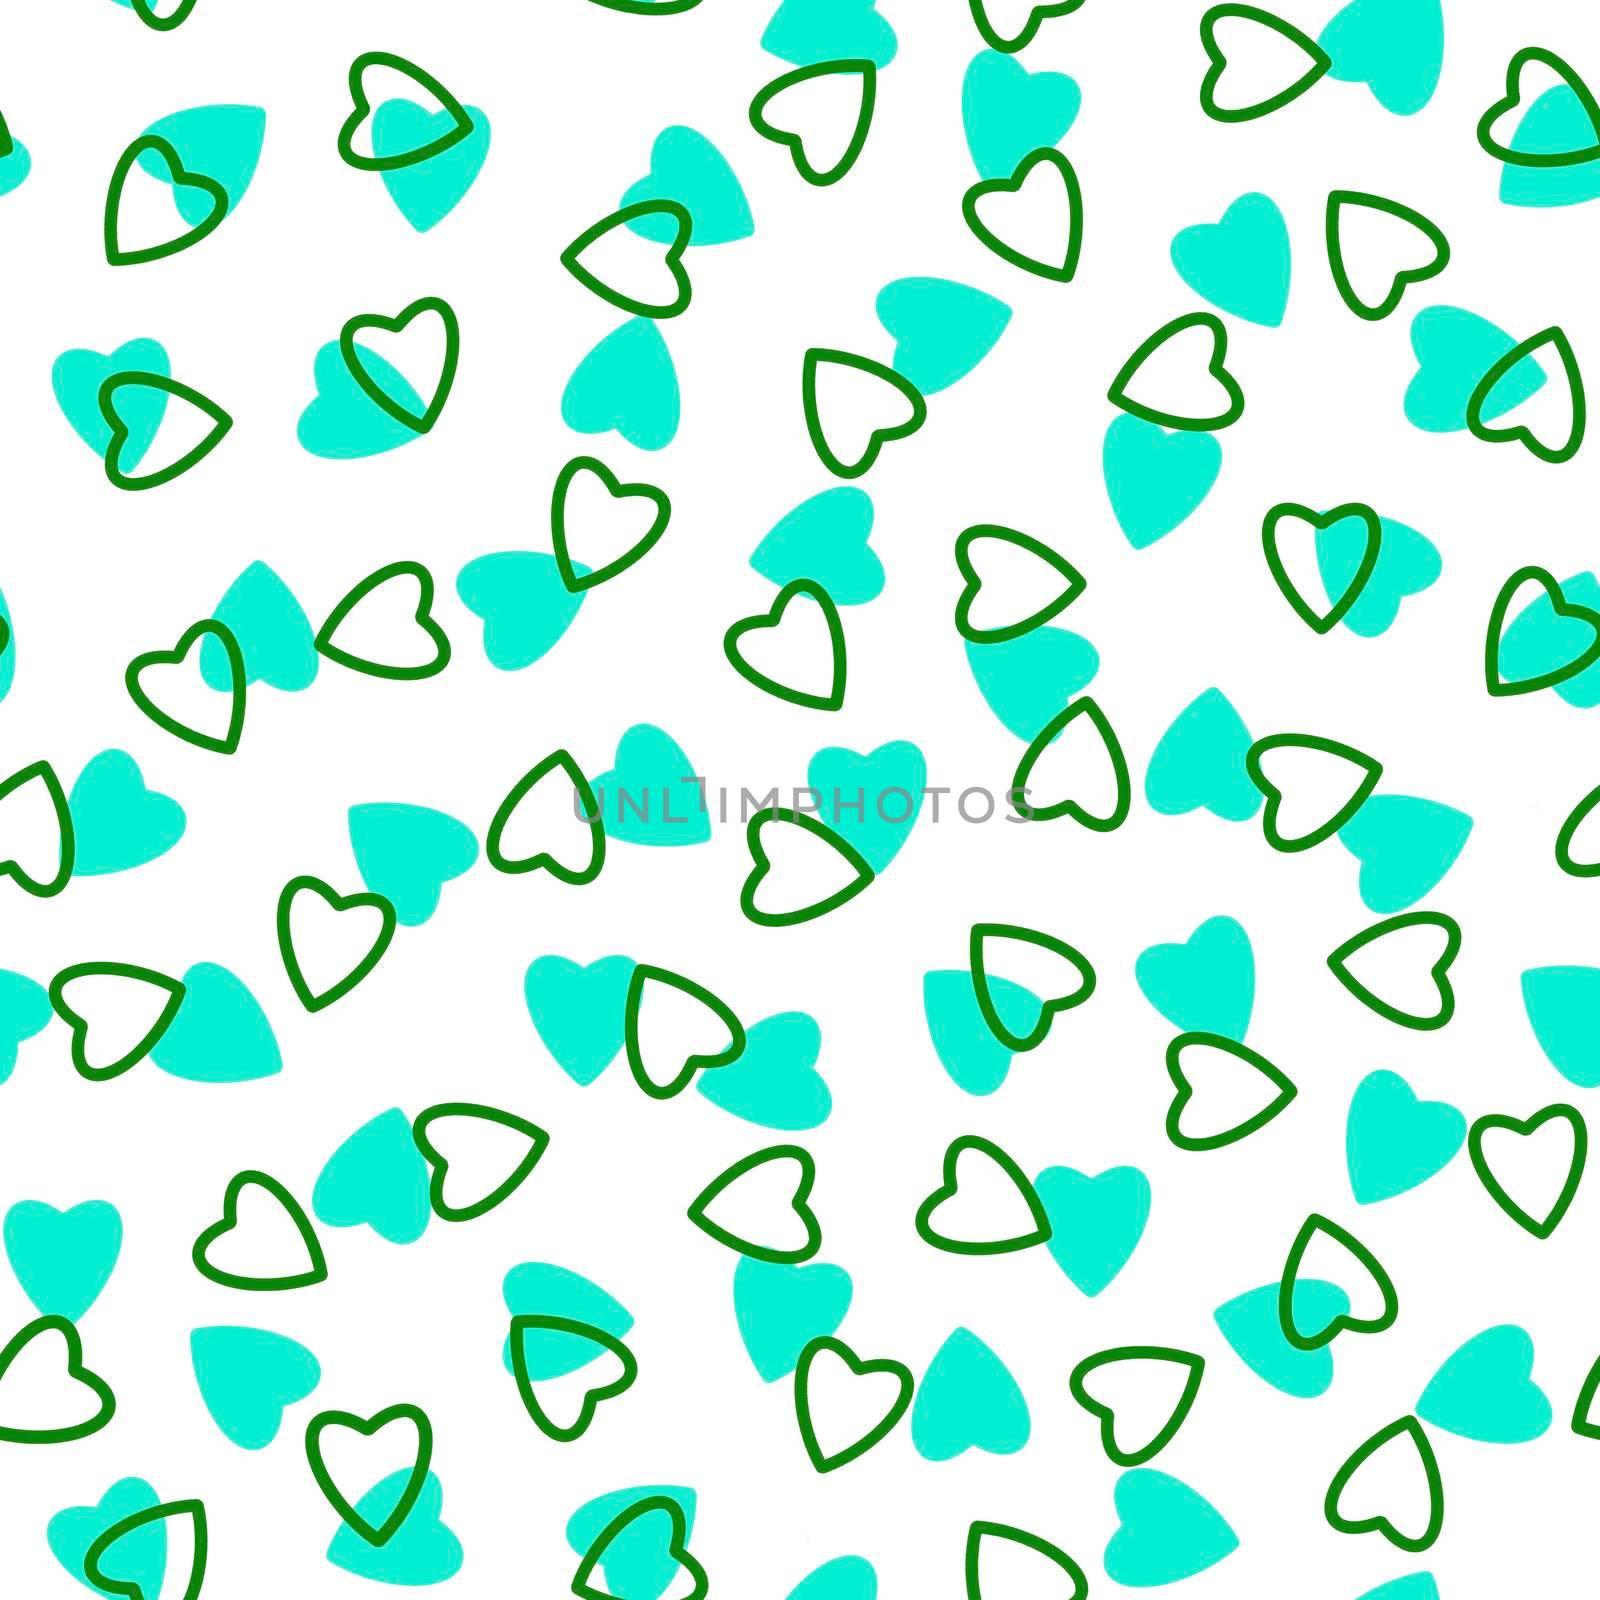 Simple heart seamless pattern,endless chaotic texture made of tiny heart silhouettes.Valentines,mothers day background.Great for Easter,wedding,scrapbook,gift wrapping paper,textiles.Azure,green,white by Angelsmoon